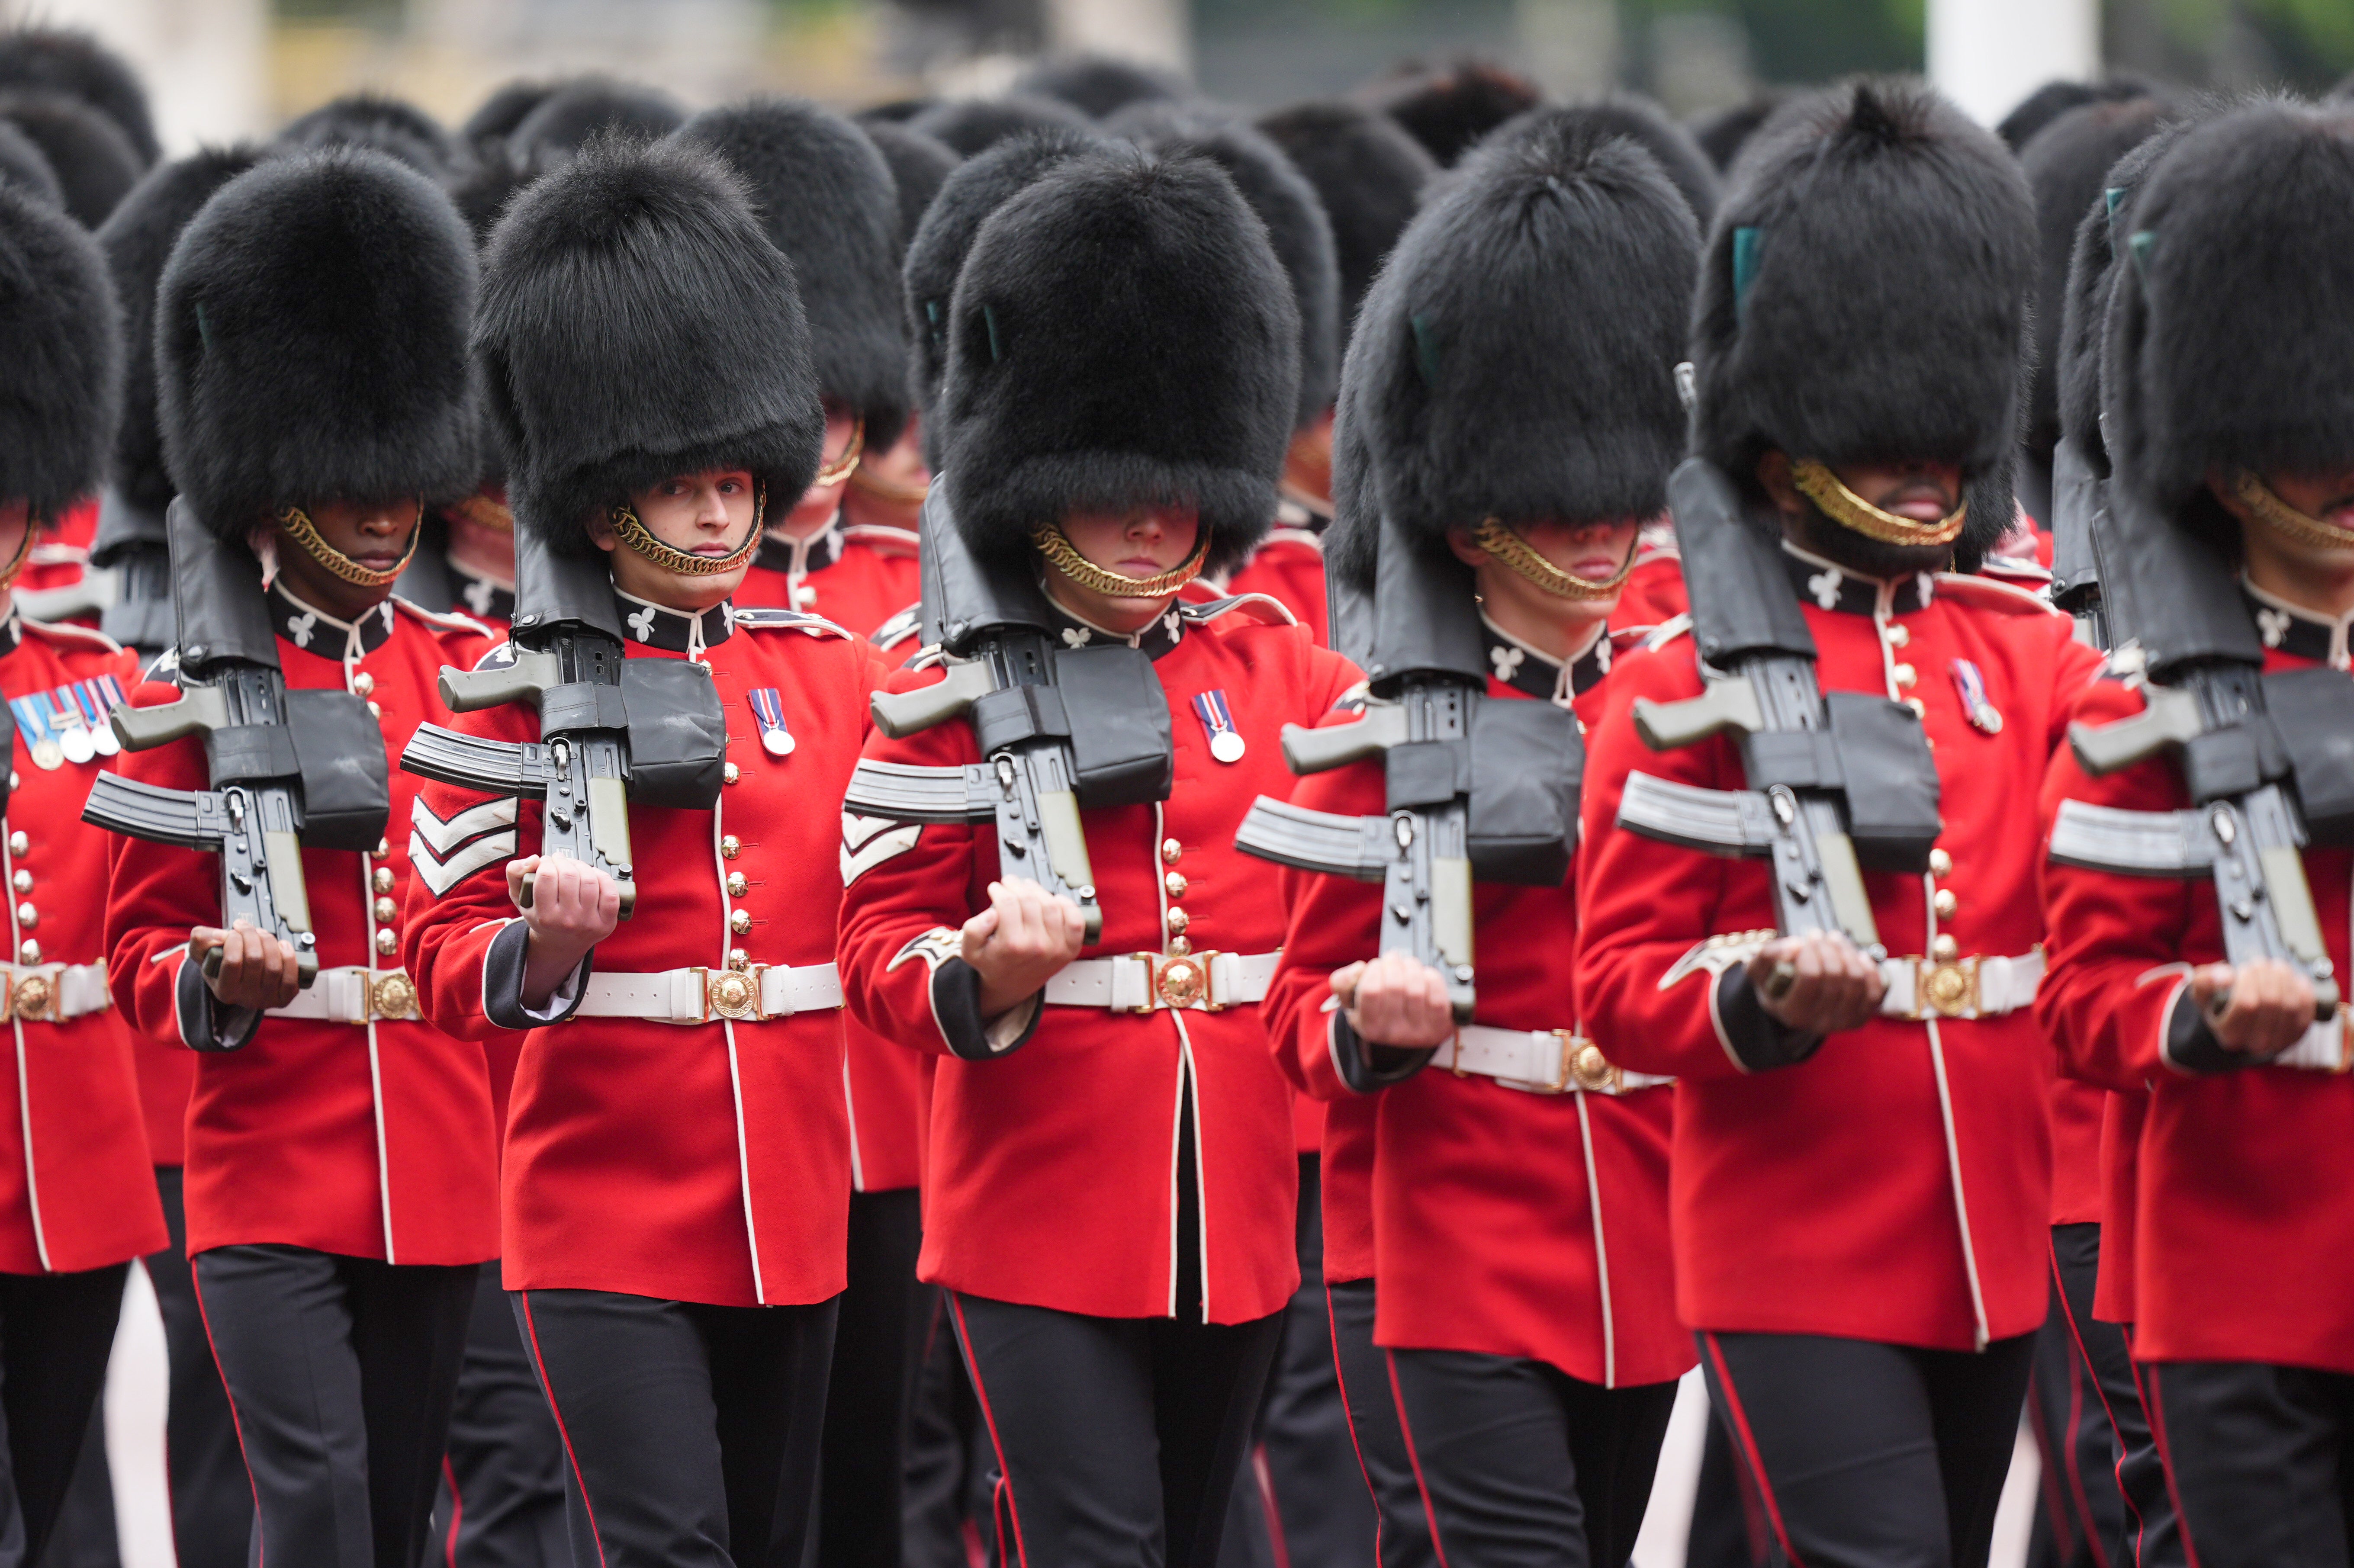 Members of the Irish Guards take part in the procession.